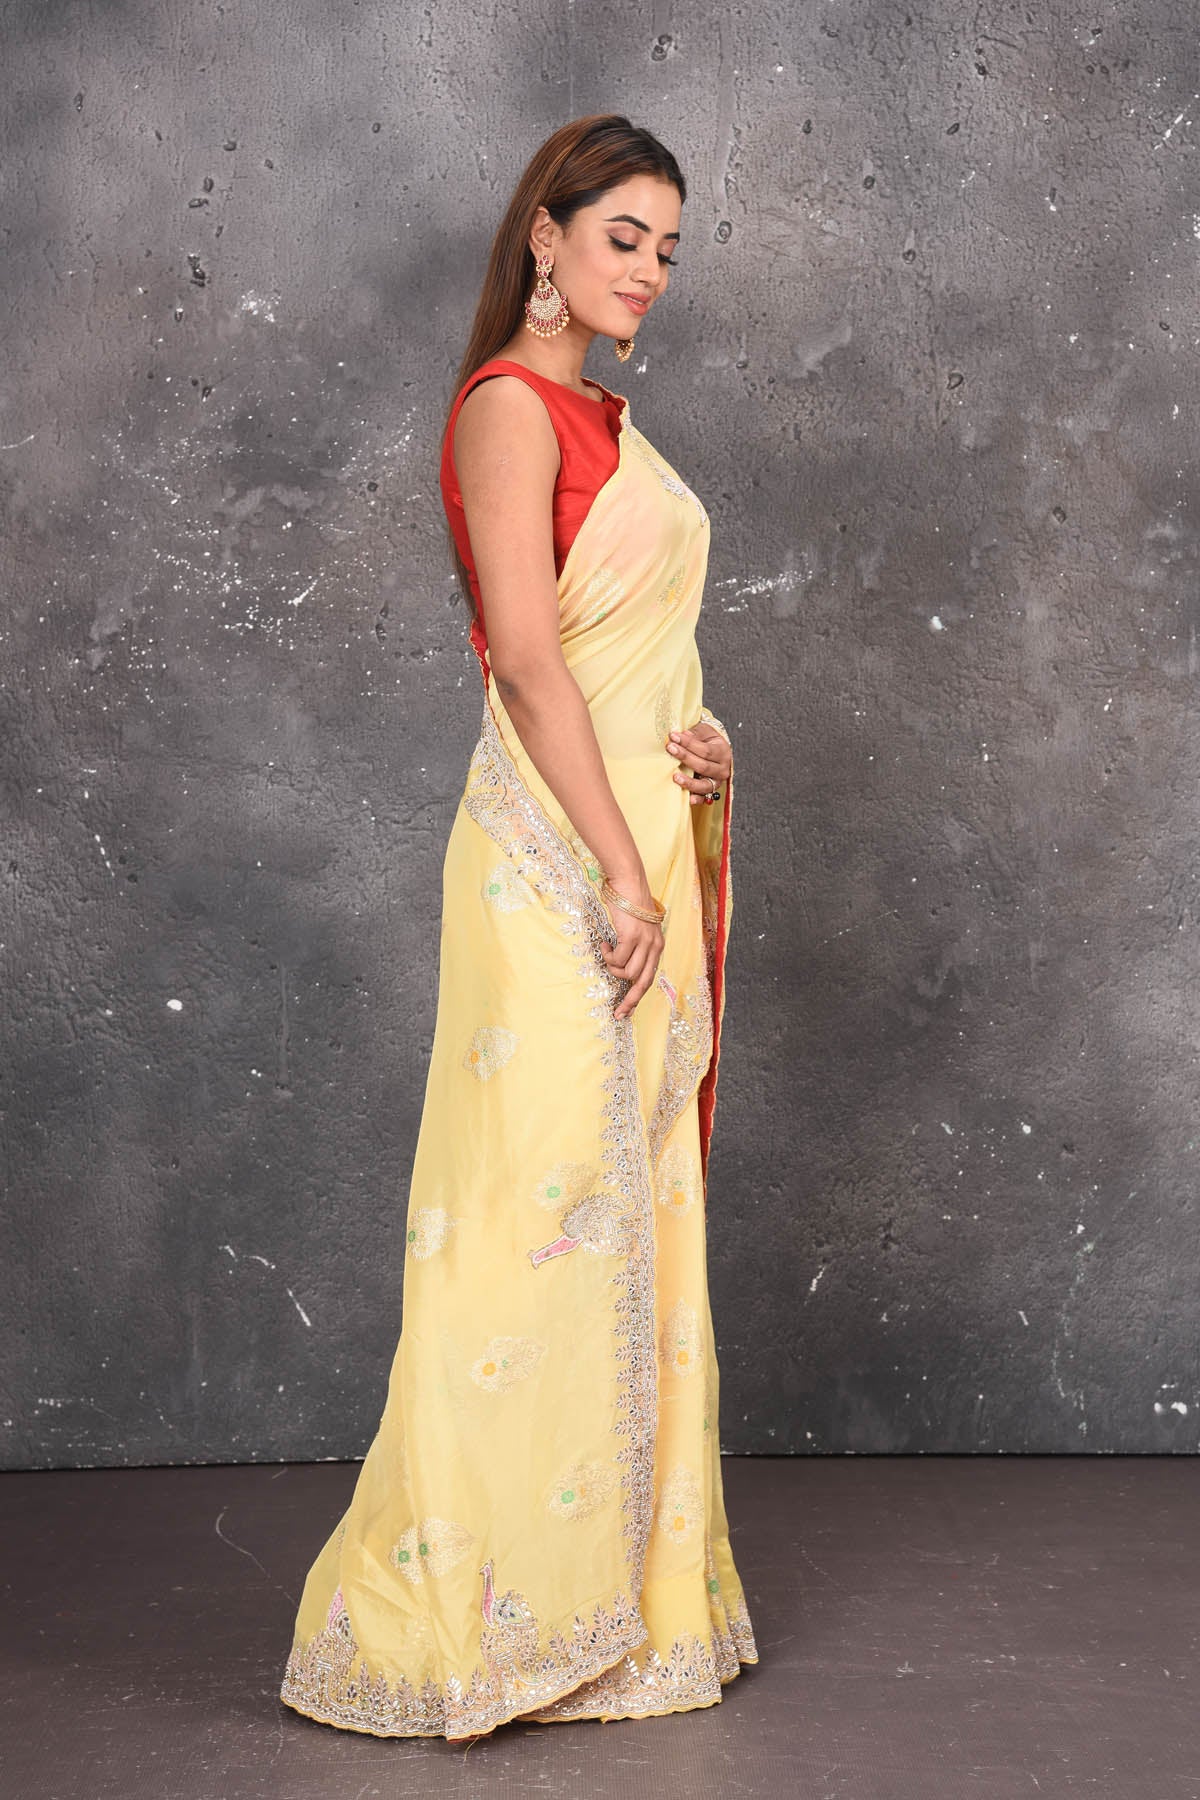 Buy this elegant lemon yellow gota patti mirror embroidered soft organza silk designer saree online in USA with beautiful peacock design threadwork, gota patti leaves and dazzling cut dana and mirror work details. Mirror bootis are scattered all over the saree to match the brightness of the happy look. Add this designer sari to your collection from Pure Elegance Indian fashion store in USA.-Side view.